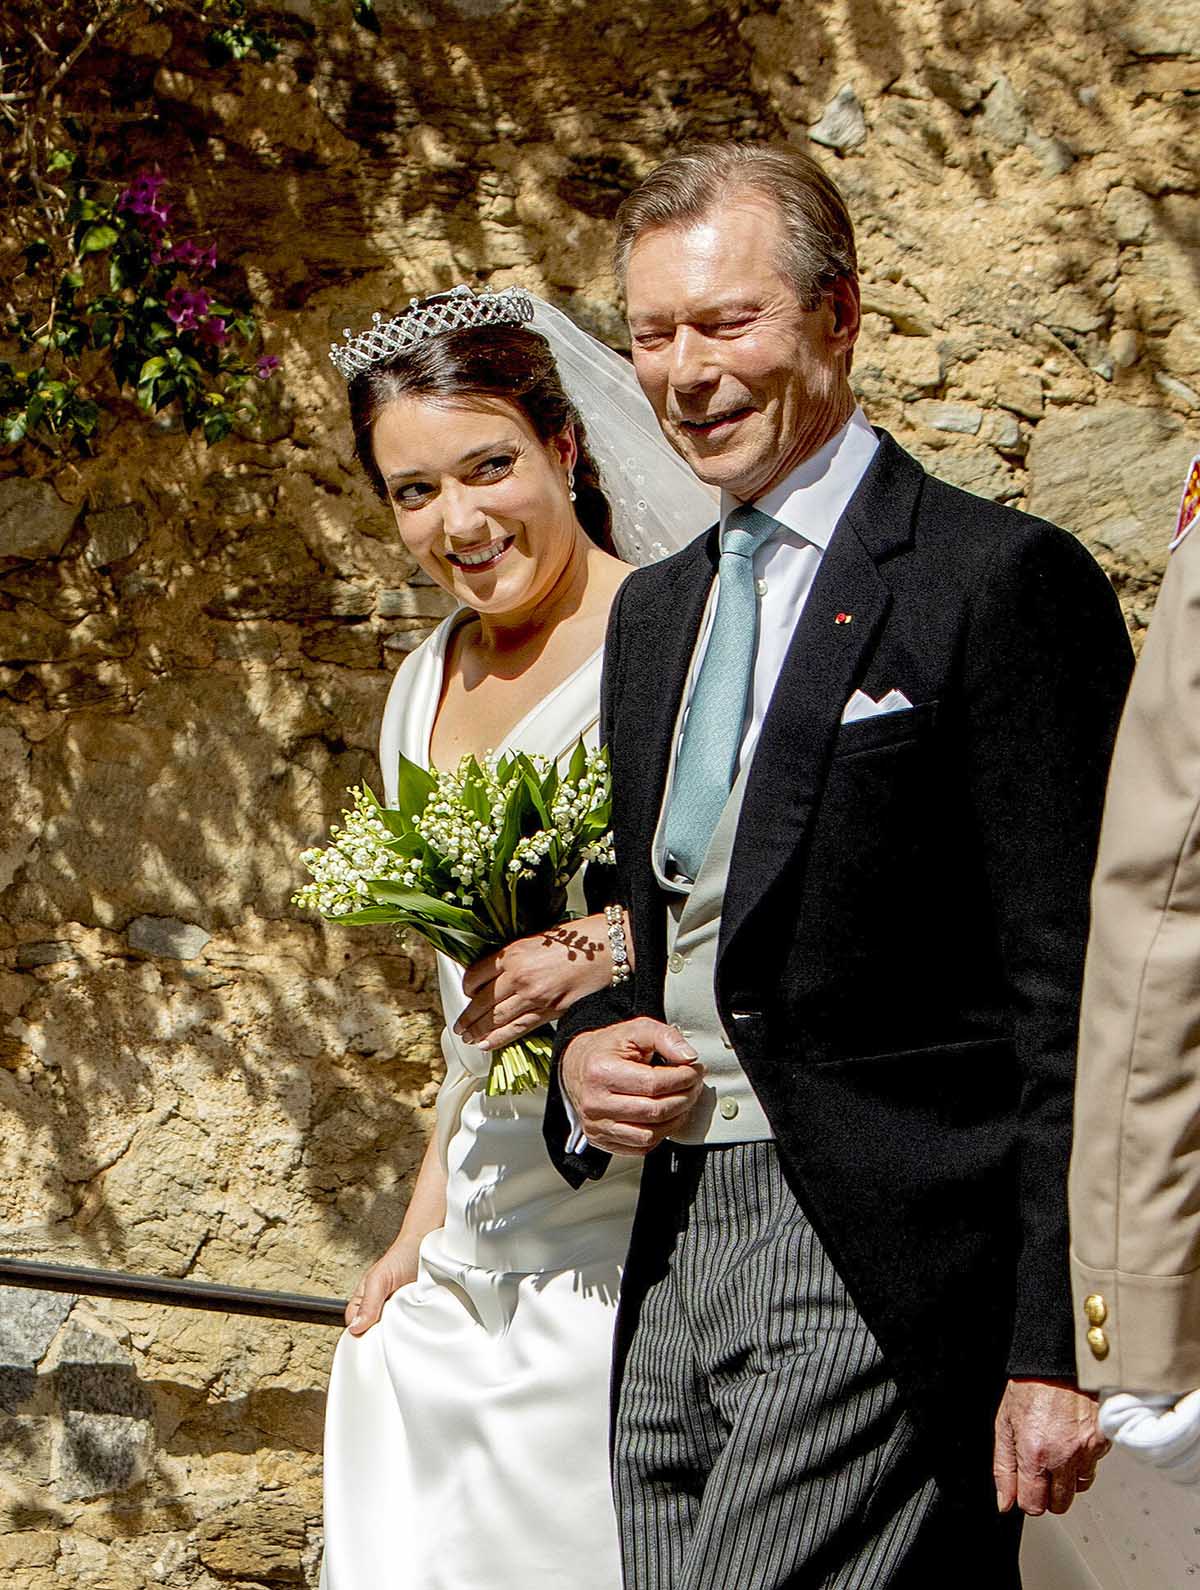 Grand Duke Henri of Luxembourg and Princess Alexandra of Luxembourg arrive a the Church Saint-Trophyme in Bormes-les-Mimosas, on April 29, 2023, to attend the Wedding of Princess Alexandra of Luxembourg and Mr. Nicolas Bagory Photo: Albert Nieboer / Netherlands OUT / Point de Vue OUT